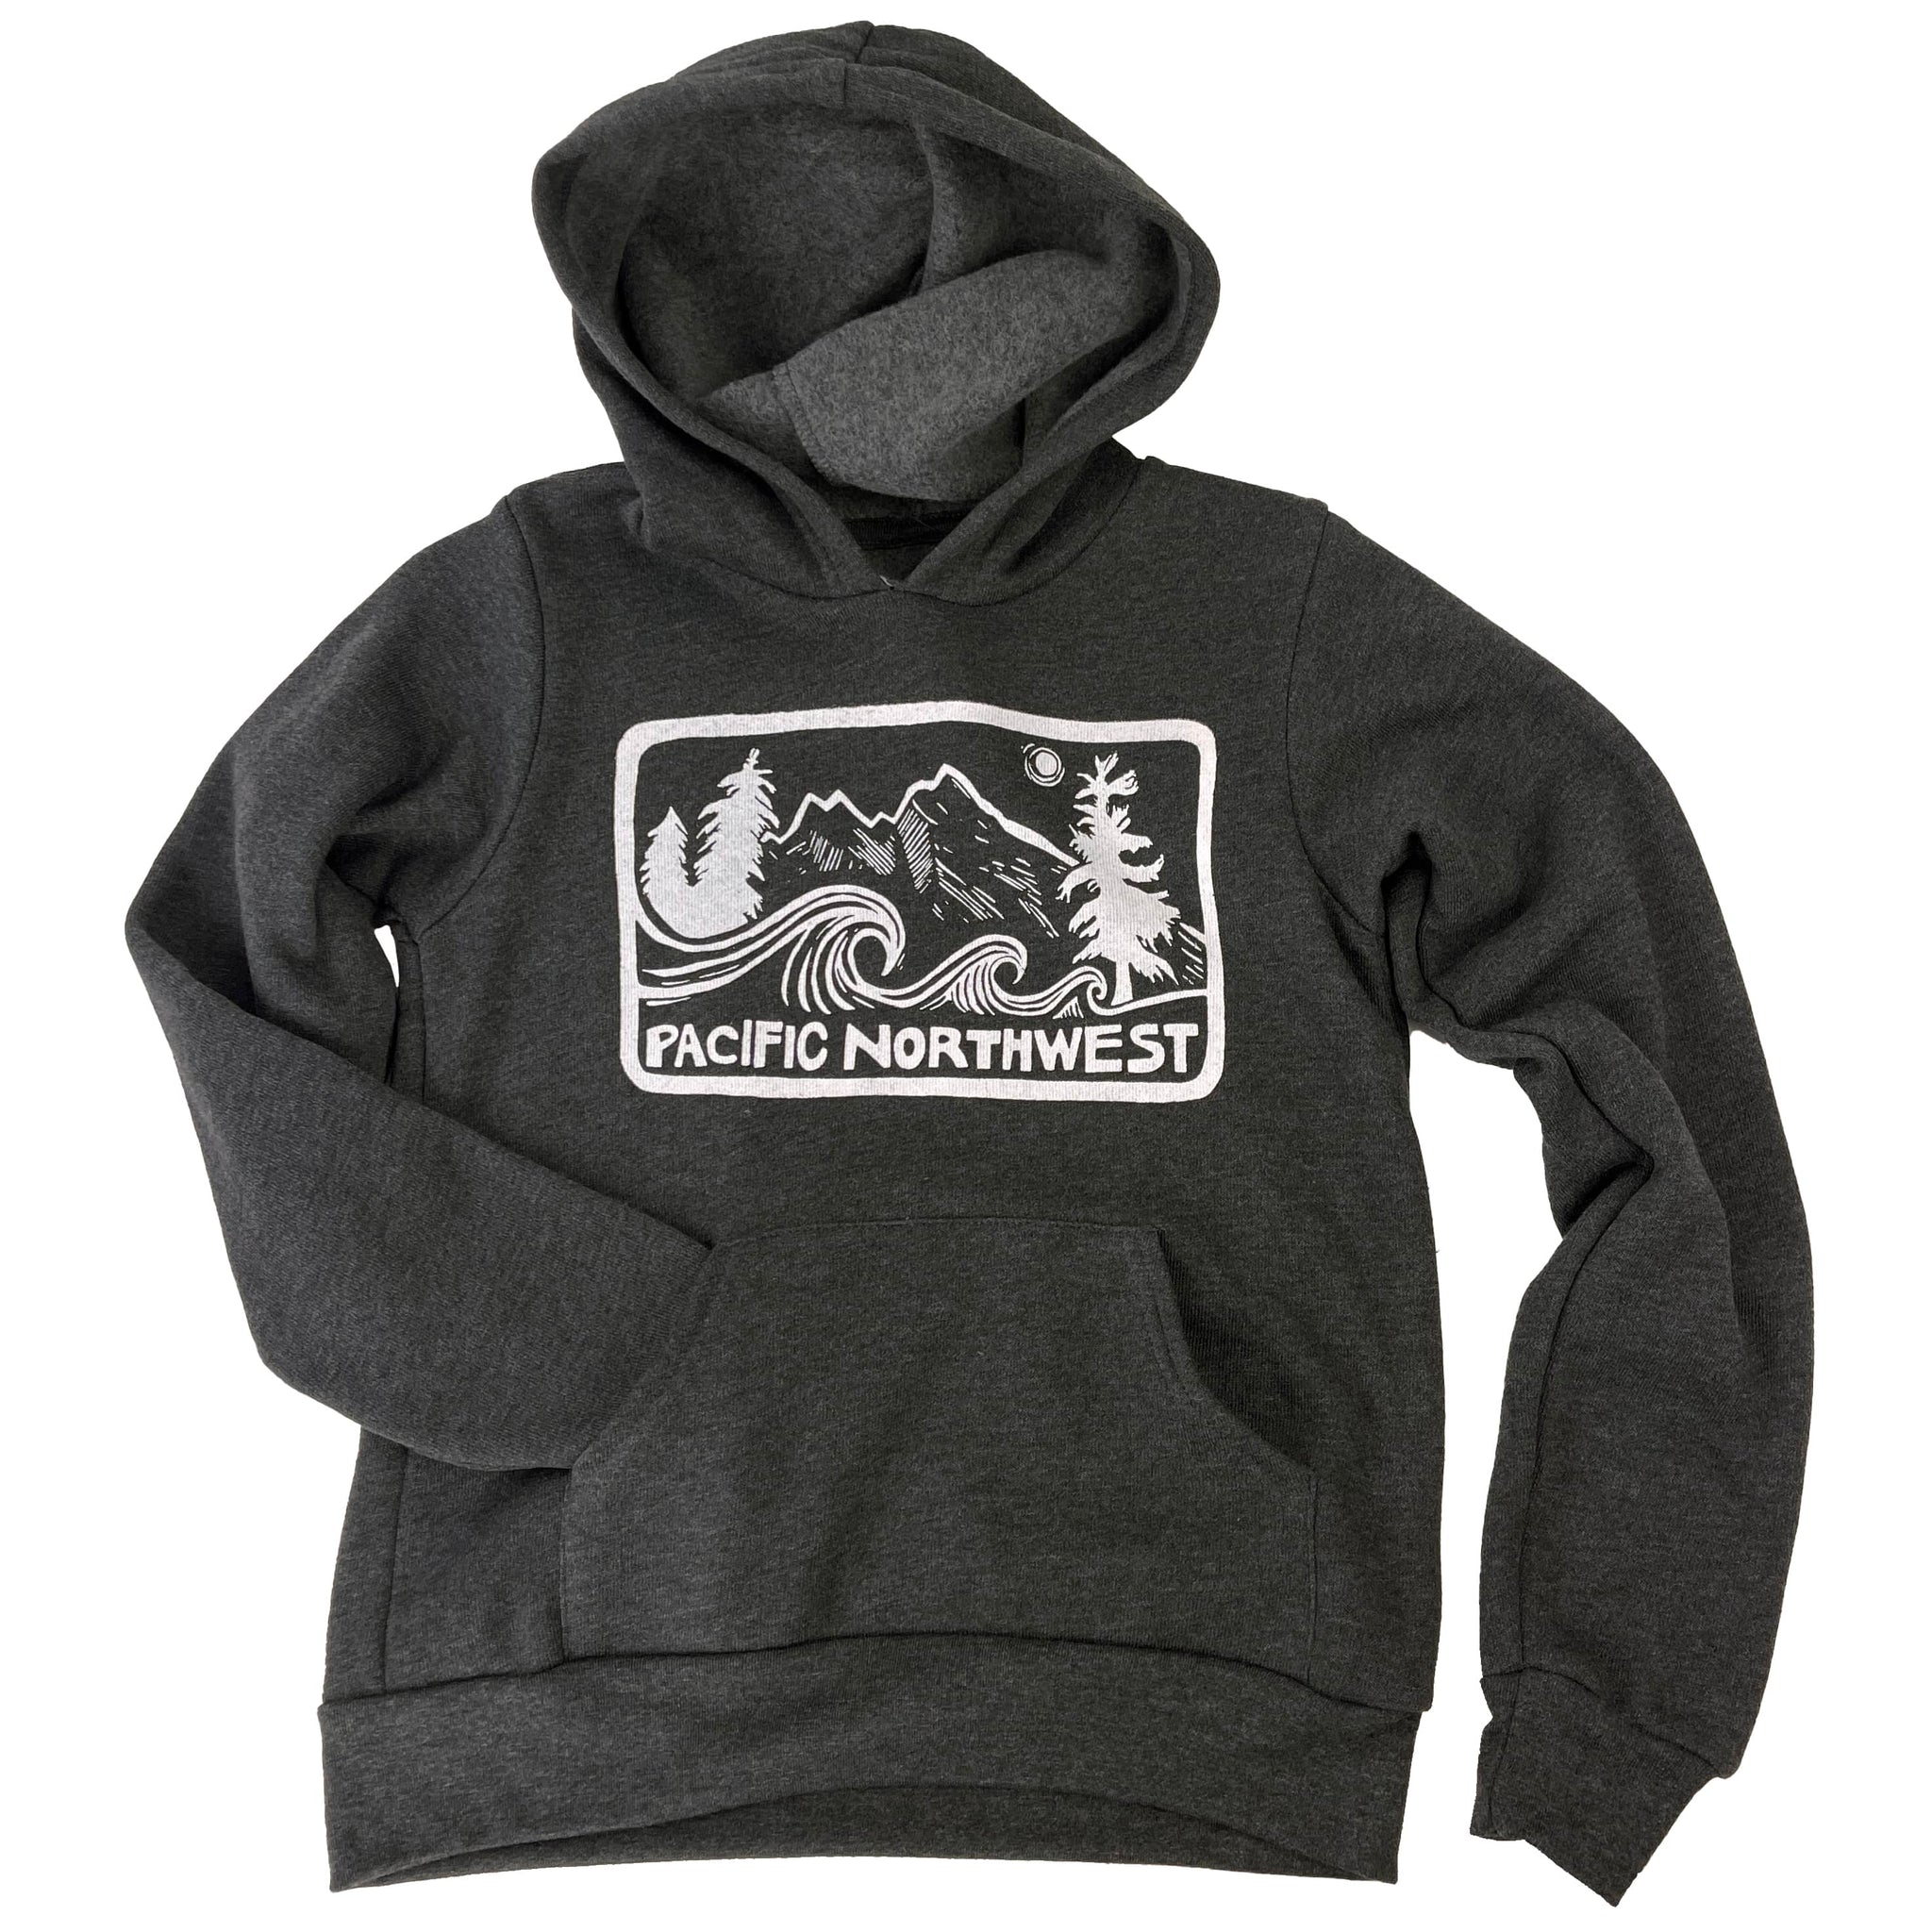 Pacific Northwest 2.0 Kid's Pullover Hoodie in Charcoal